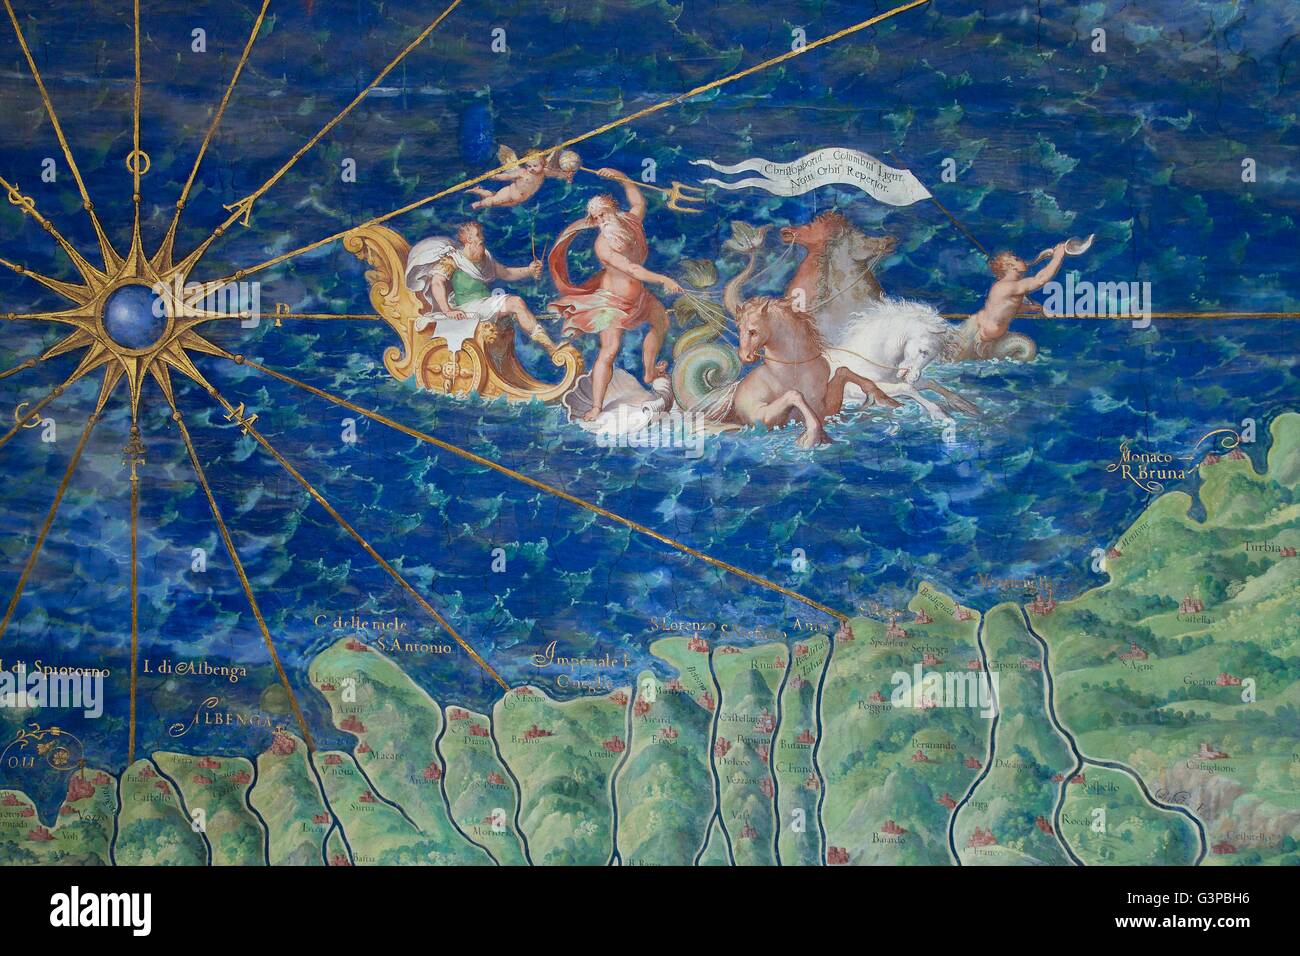 Poseidon rises with his chariot from the sea, Detail of Map of Liguria, Gallery of Maps, Vatican Museums, Rome, Italy Stock Photo